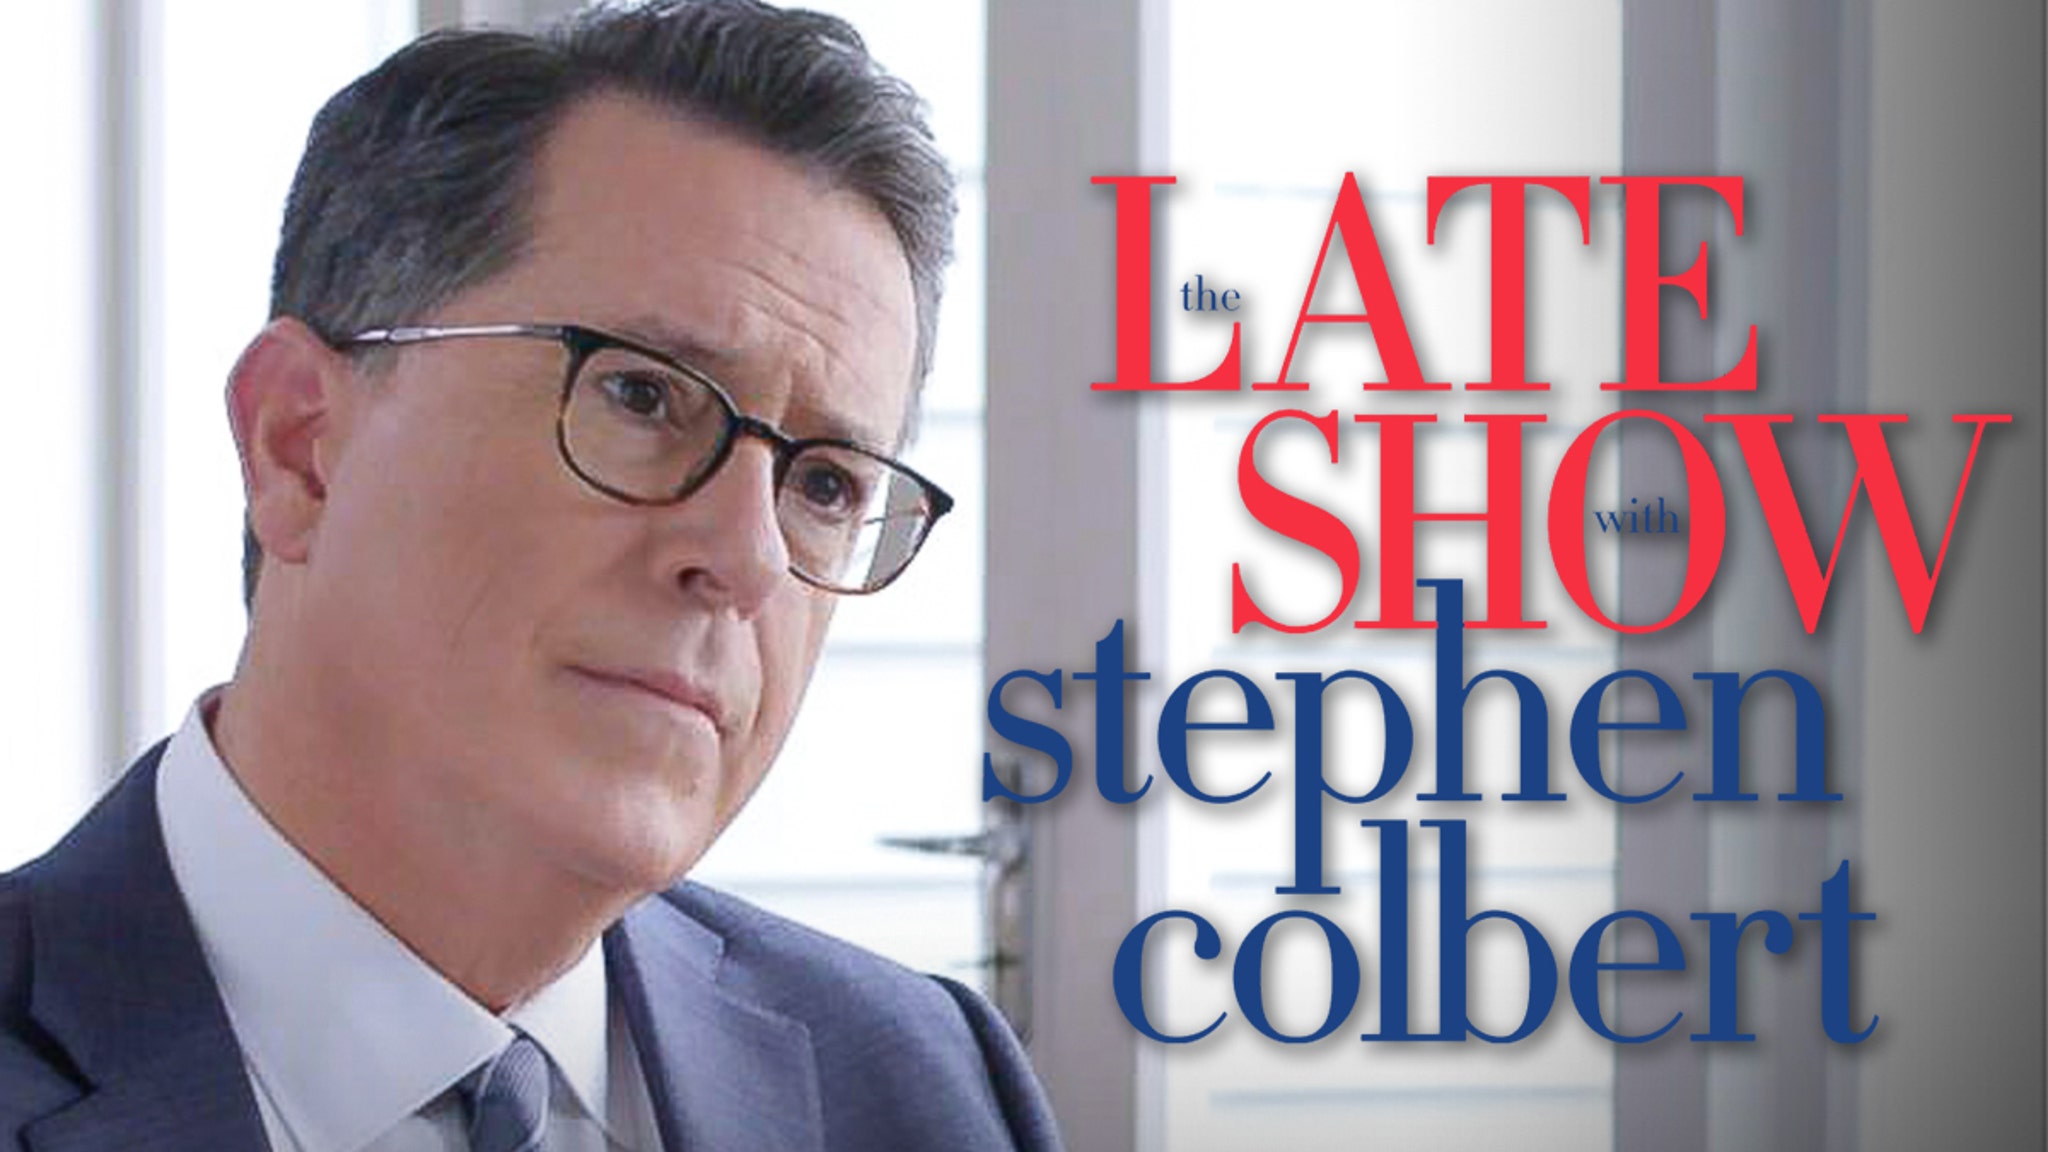 'Late Show With Stephen Colbert' Staffers Arrested at U.S. Capitol, Report thumbnail